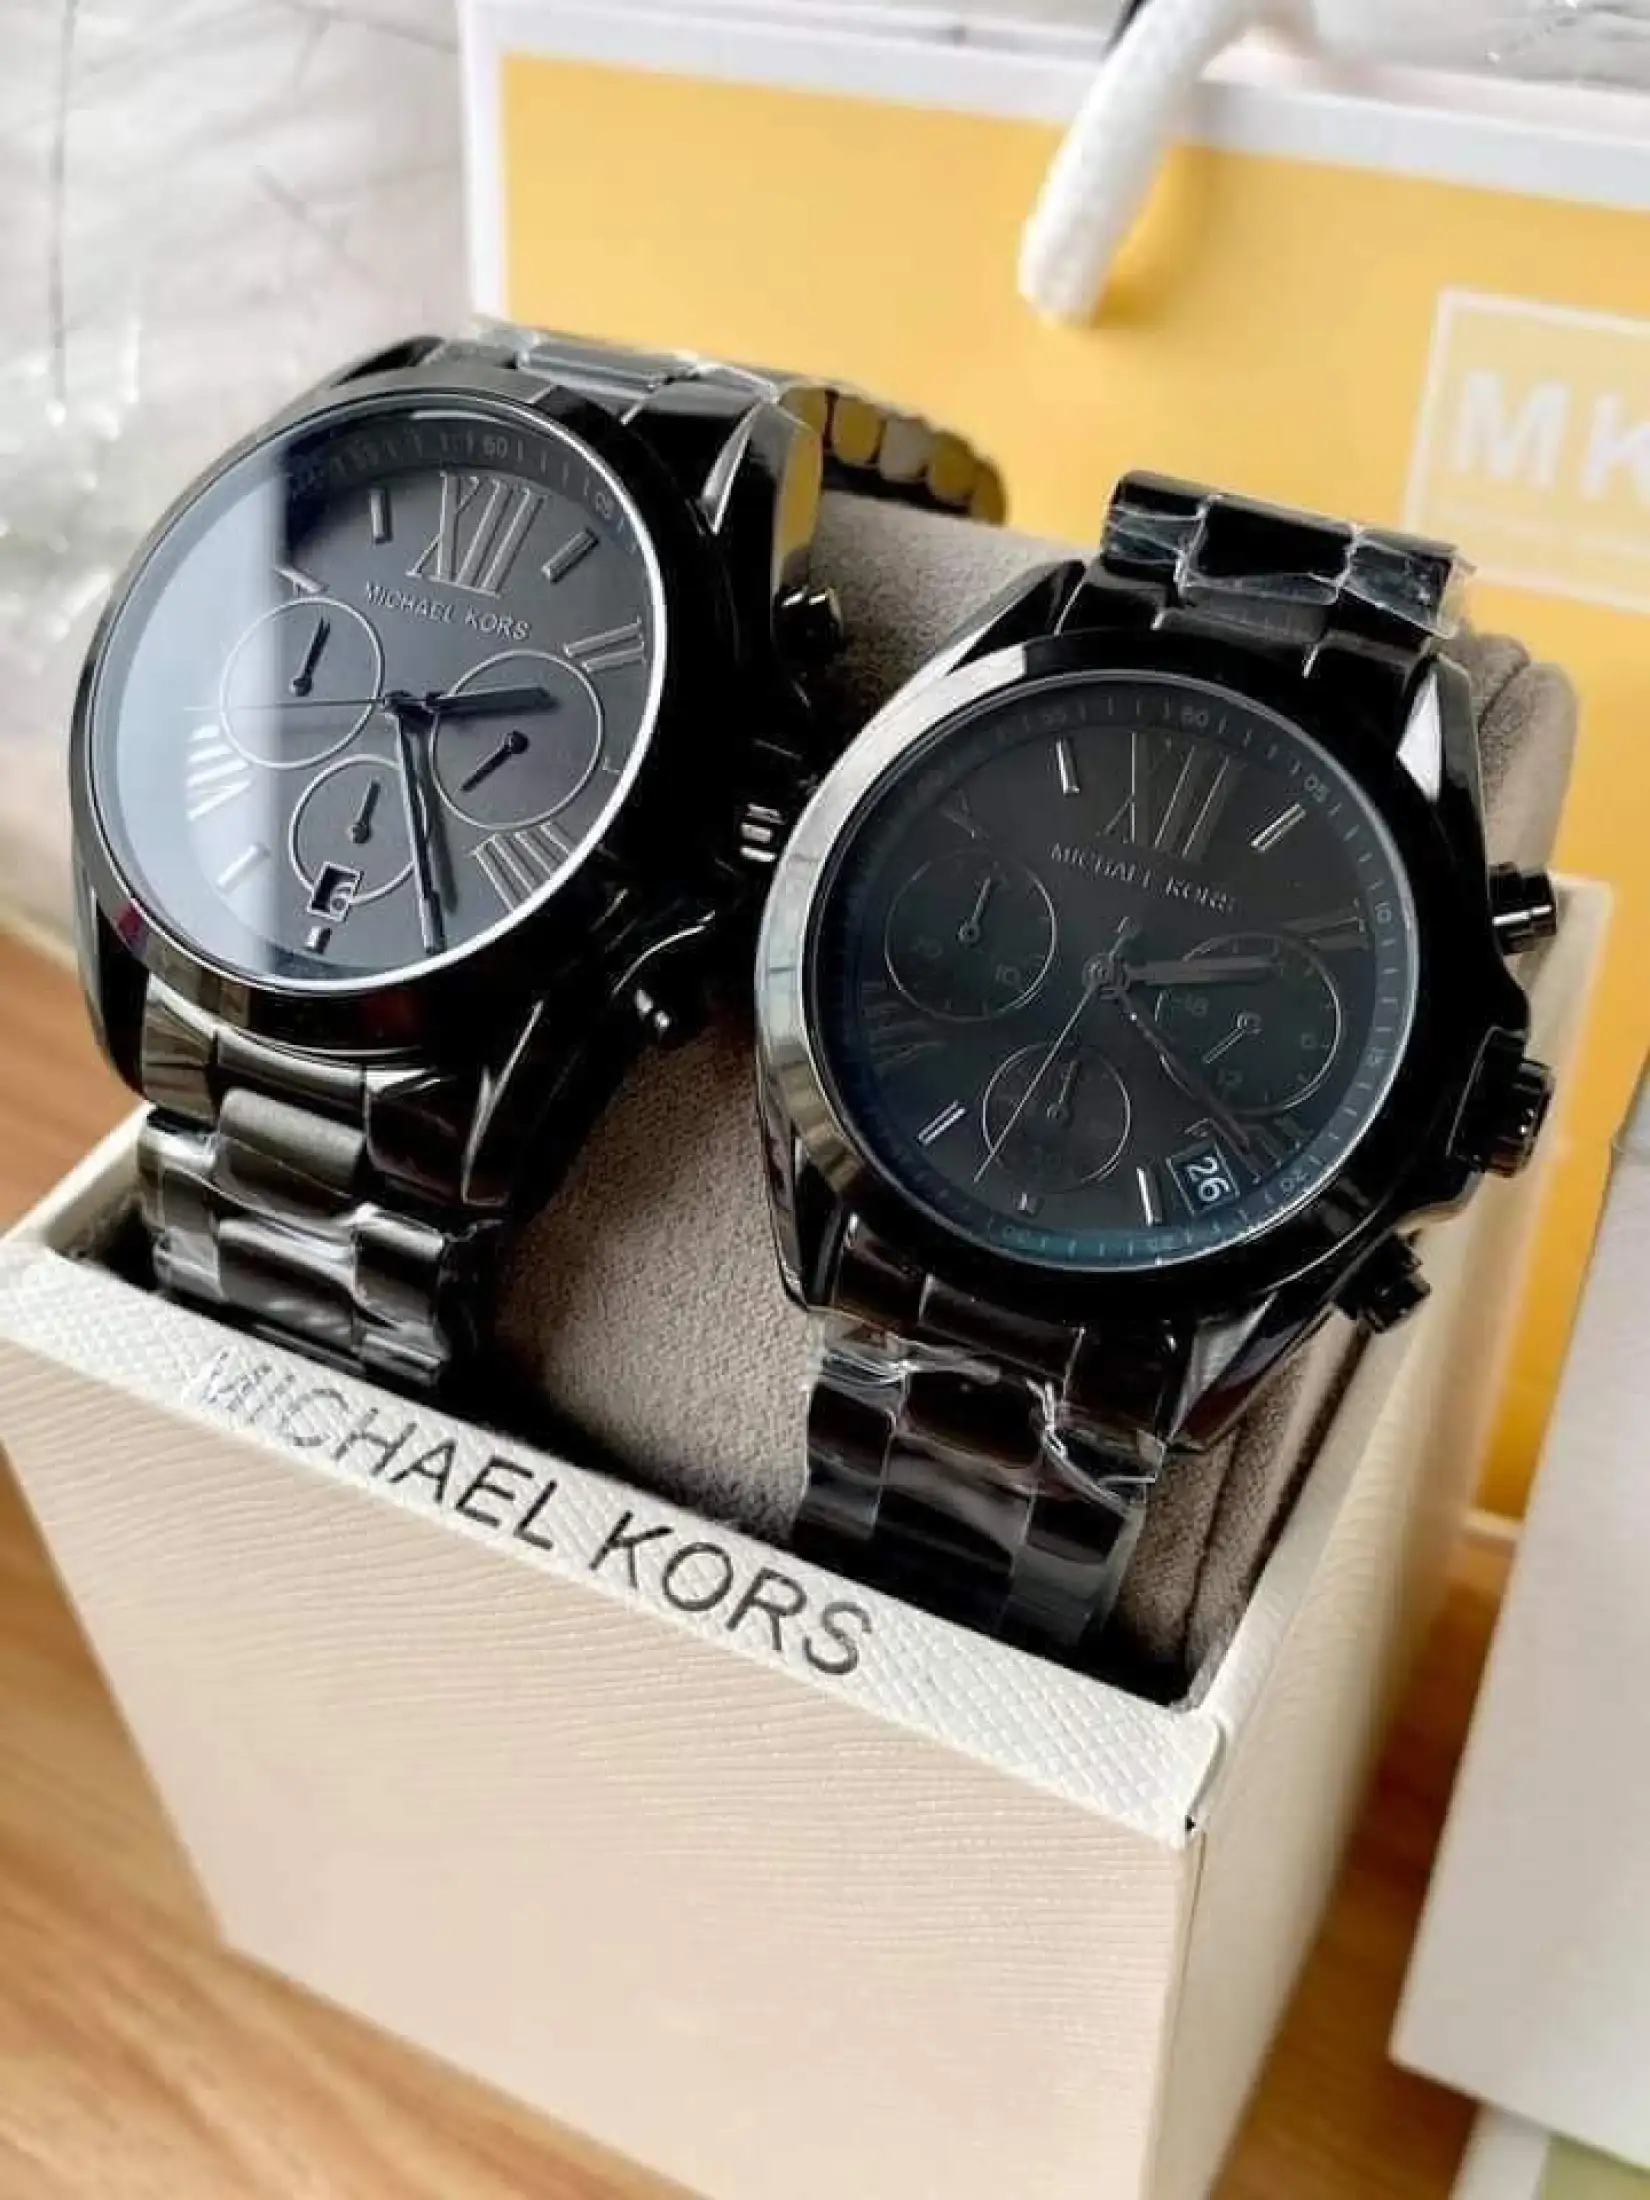 Reparation mulig Ordsprog amatør Tekpinoy - Black Women's Mk Bradshaw Authentic and Pawnable Michael Kors  watch - Men's Watch OR Women's watch for Formal or Casual Lowest Price  Stainless Steel | Lazada PH